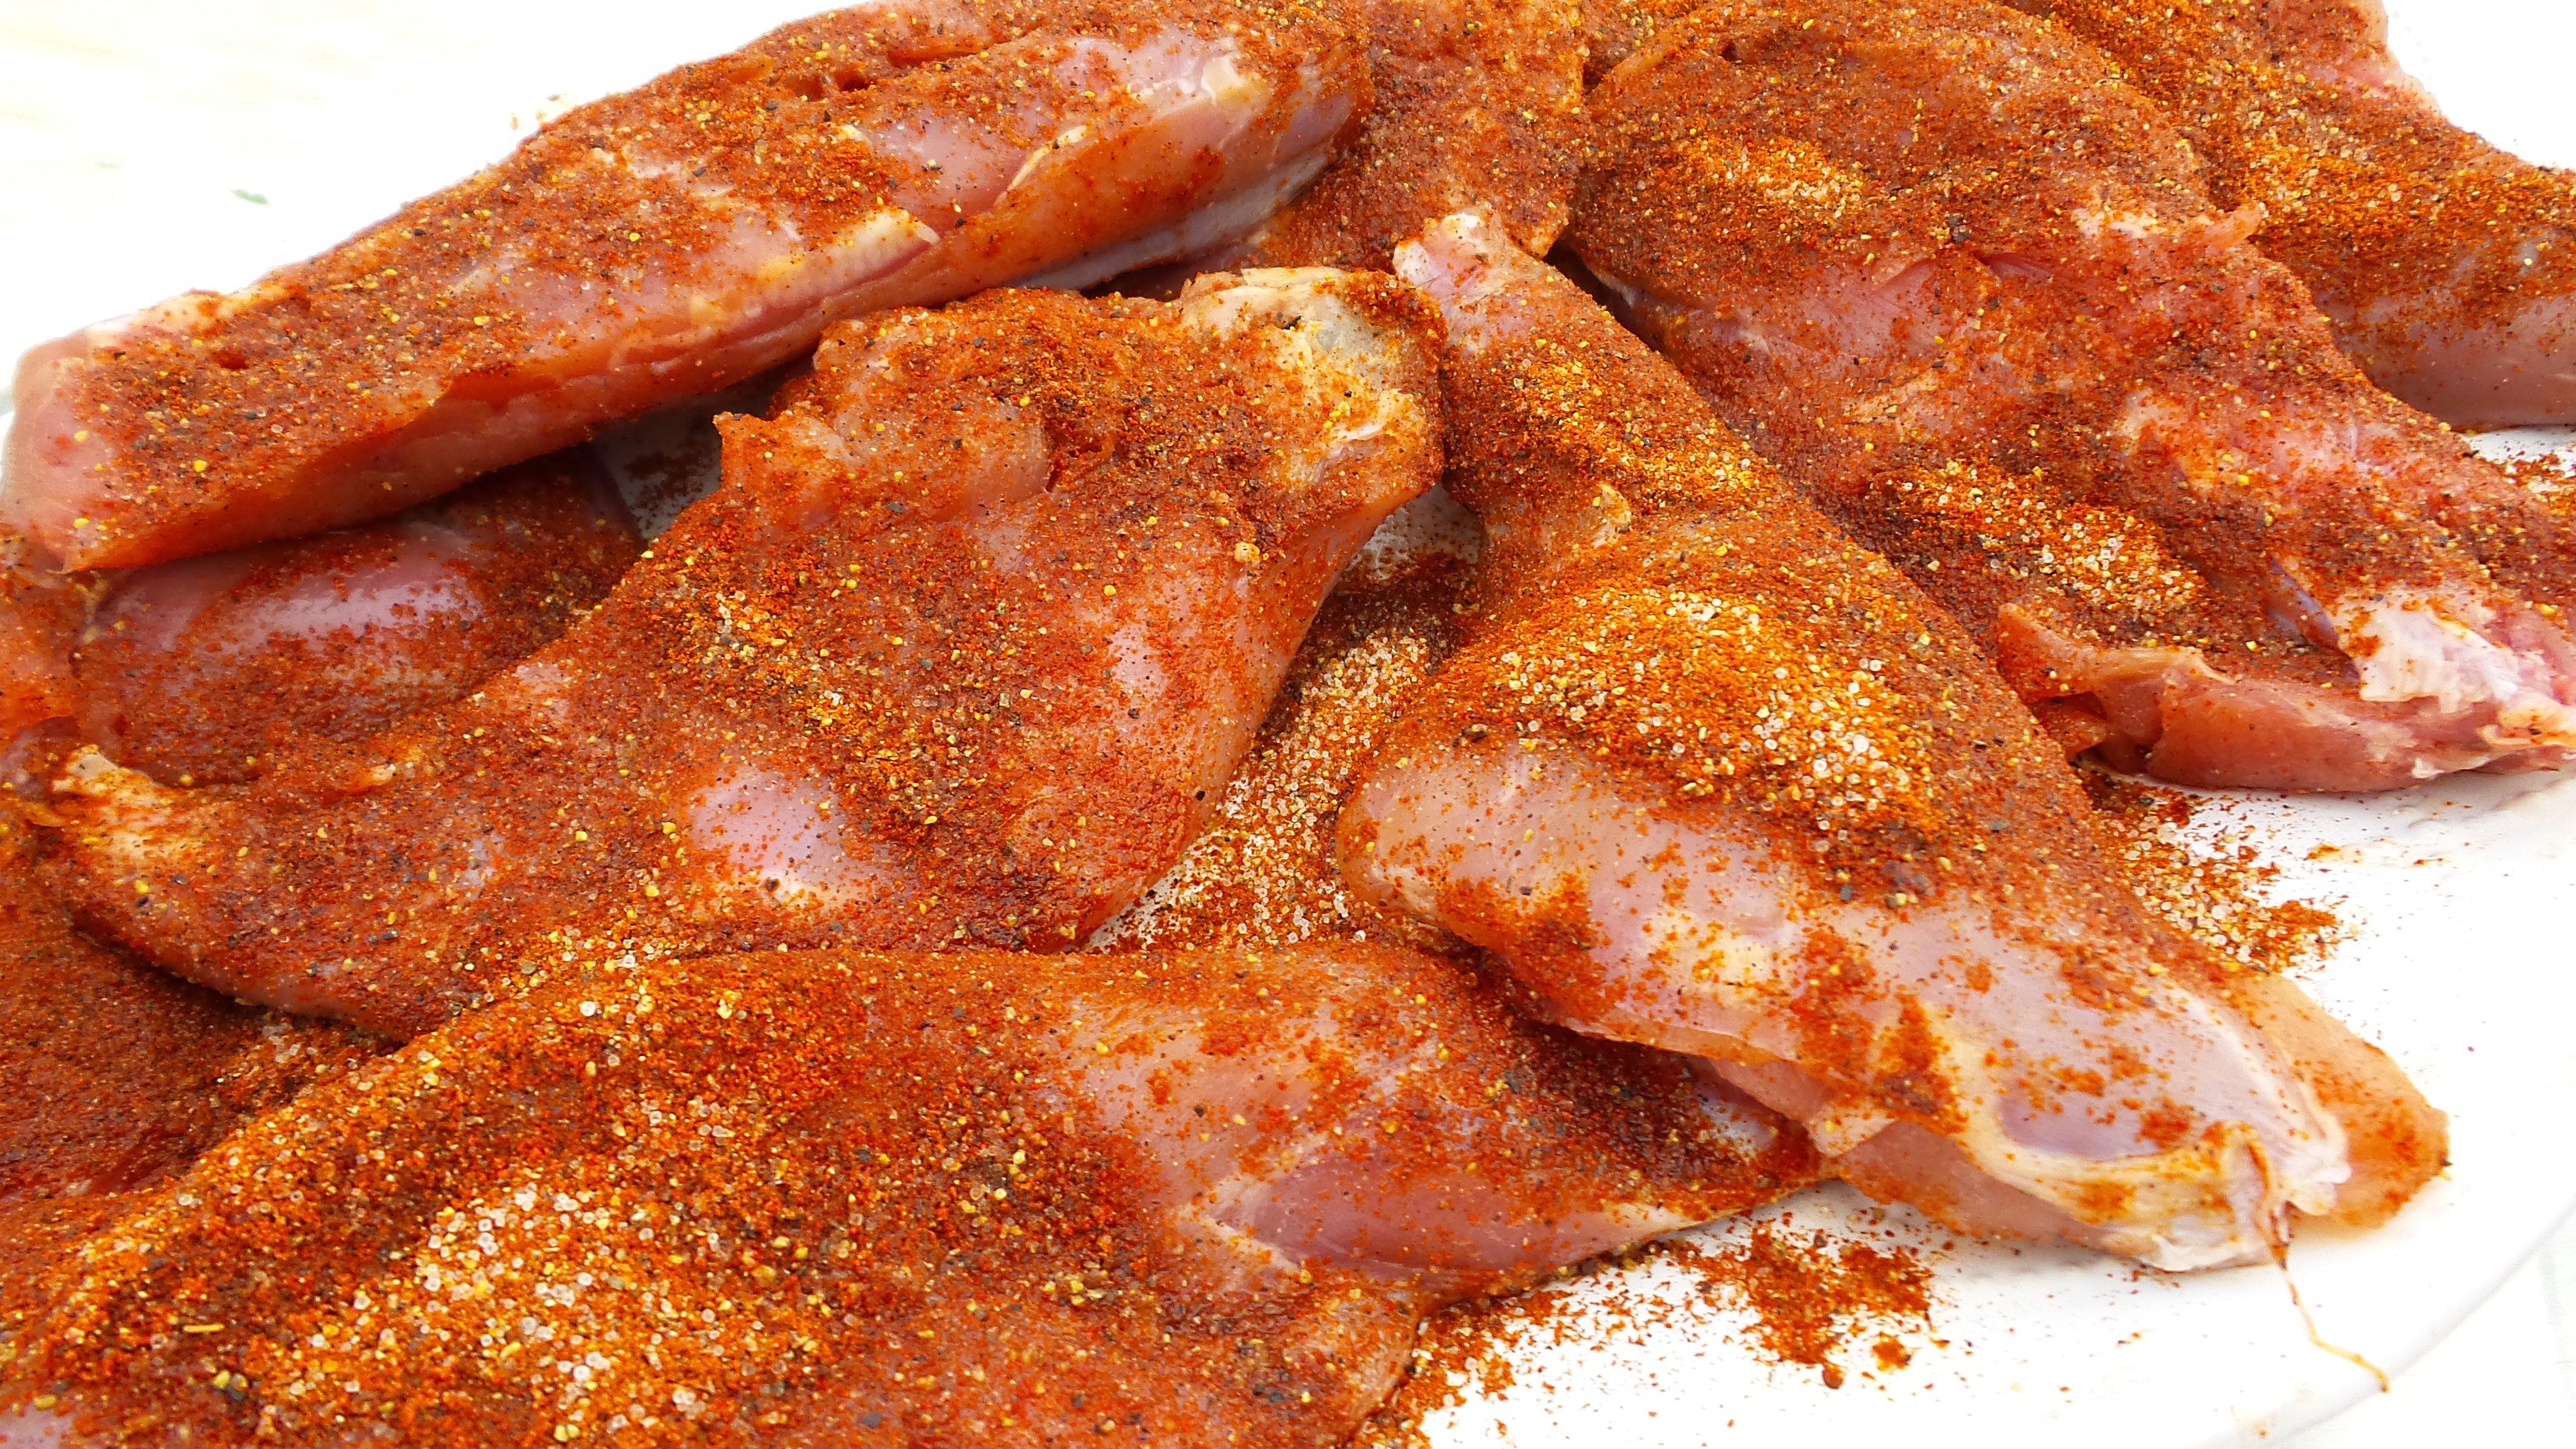 Season the rabbit with the rub and let it rest in the refrigerator for 1-2 hours.